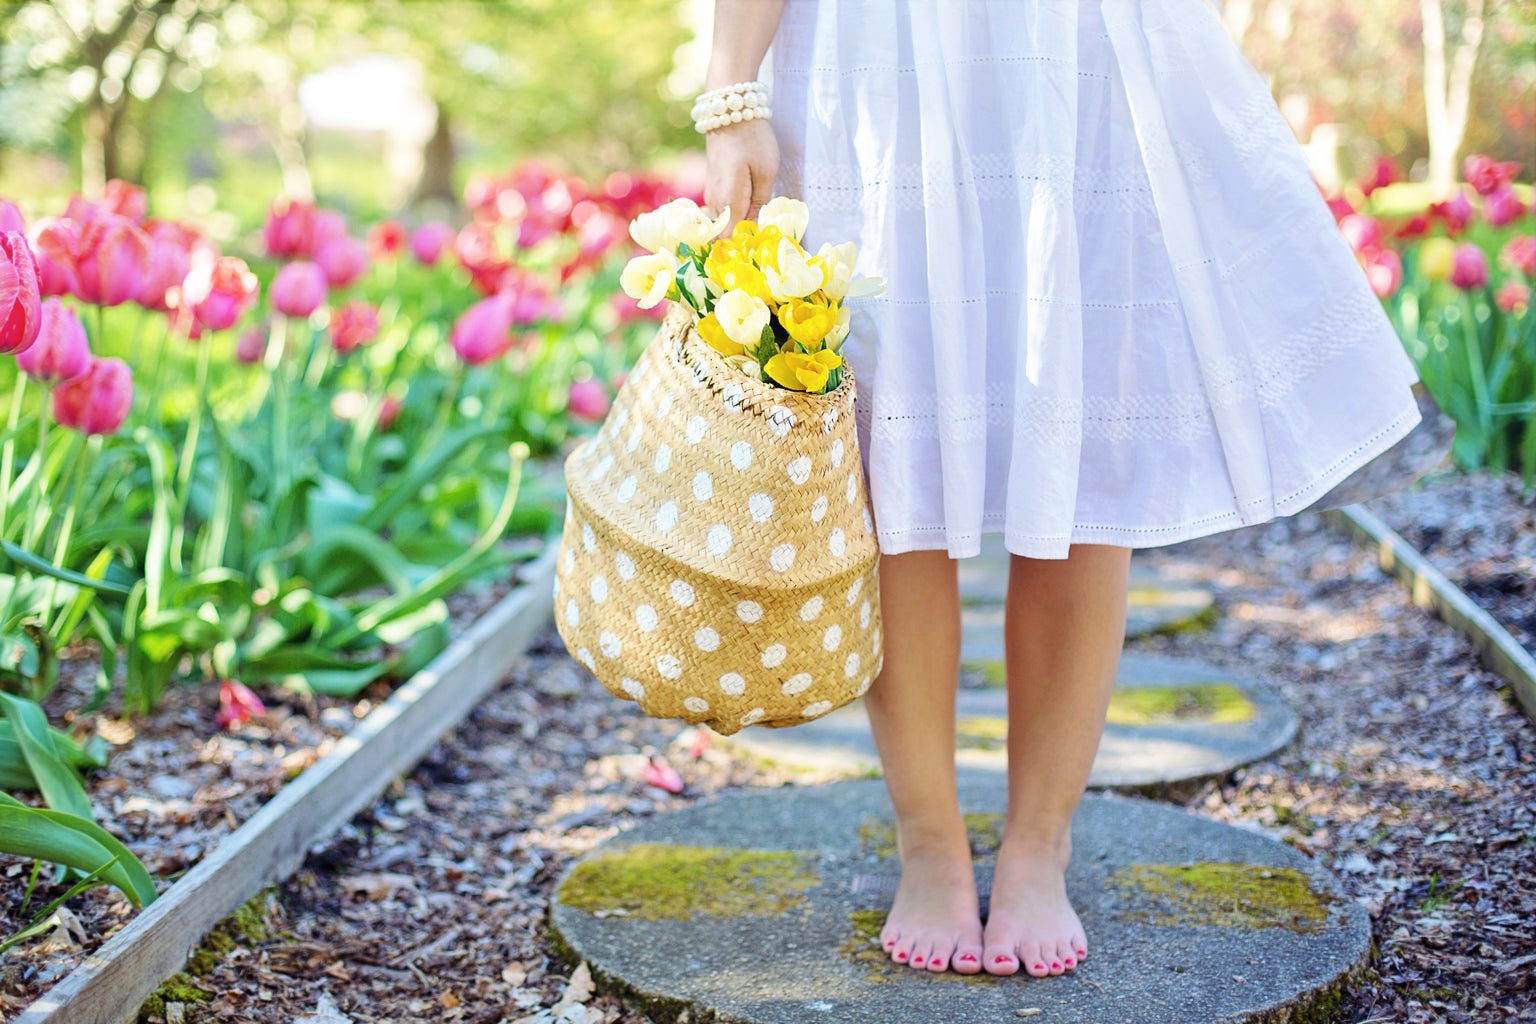 woman staning barefoot in a flower garden holding a basket of yellow flowers